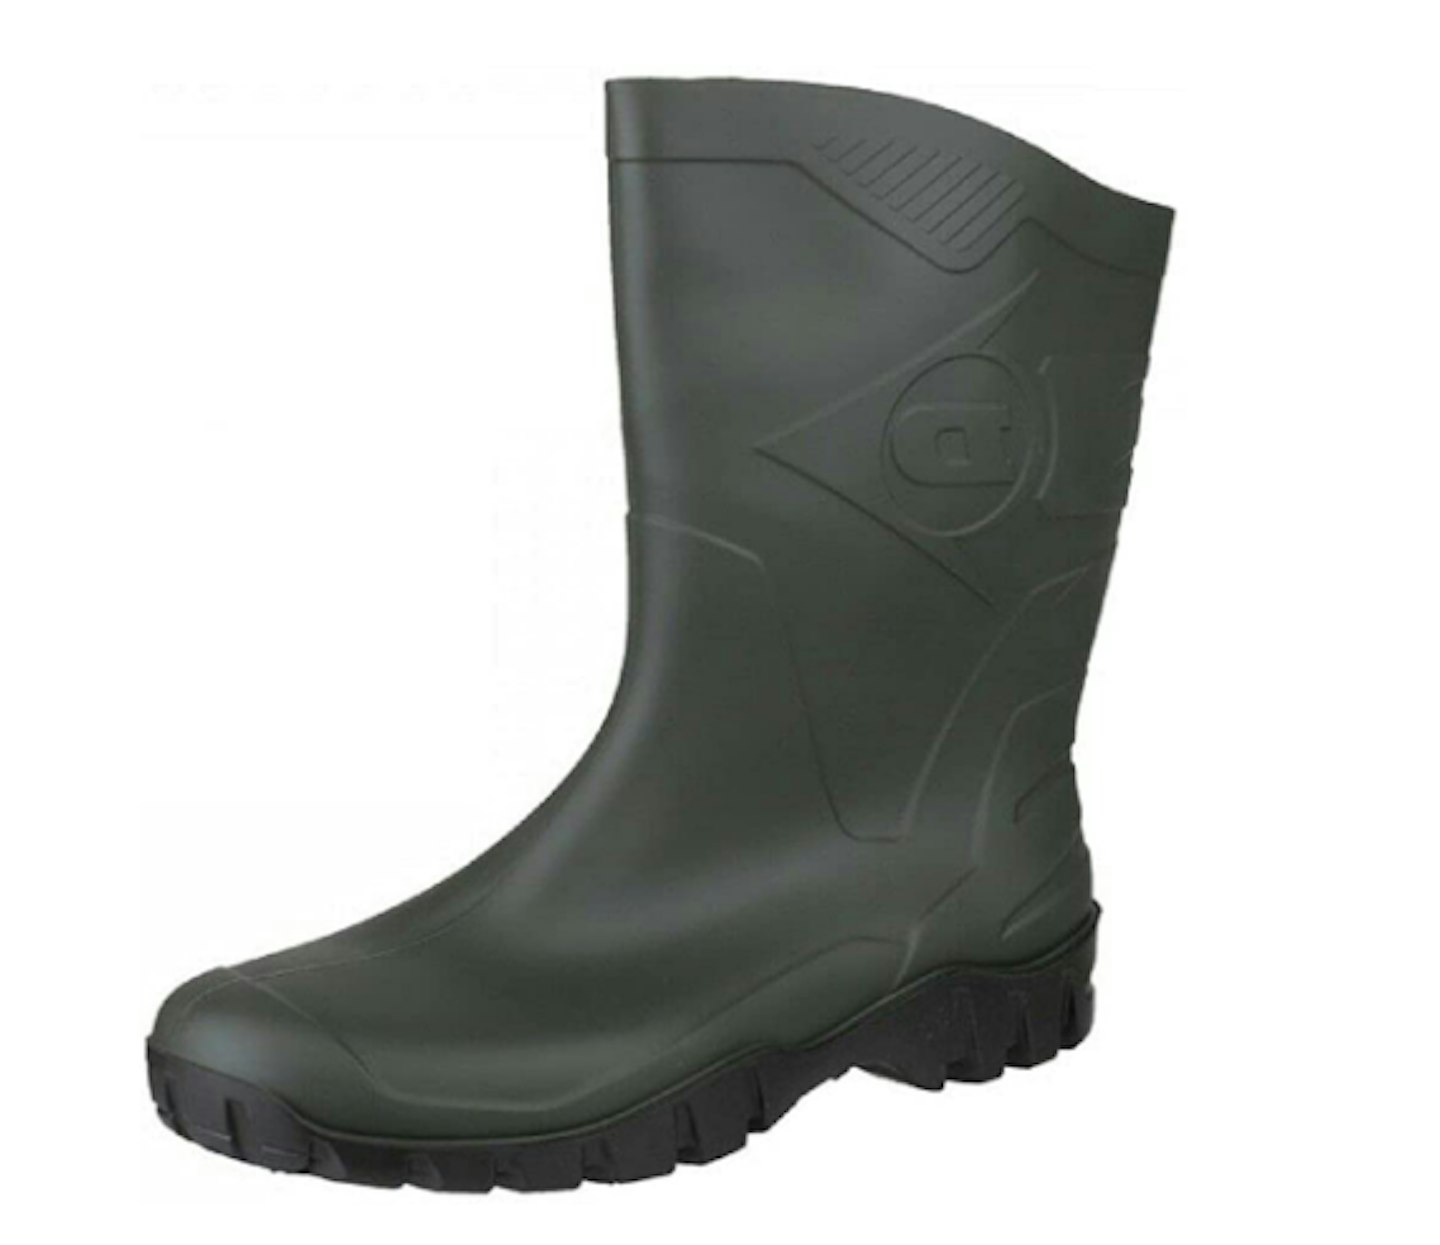 Dunlop DUO19 Unisex Safety Boots